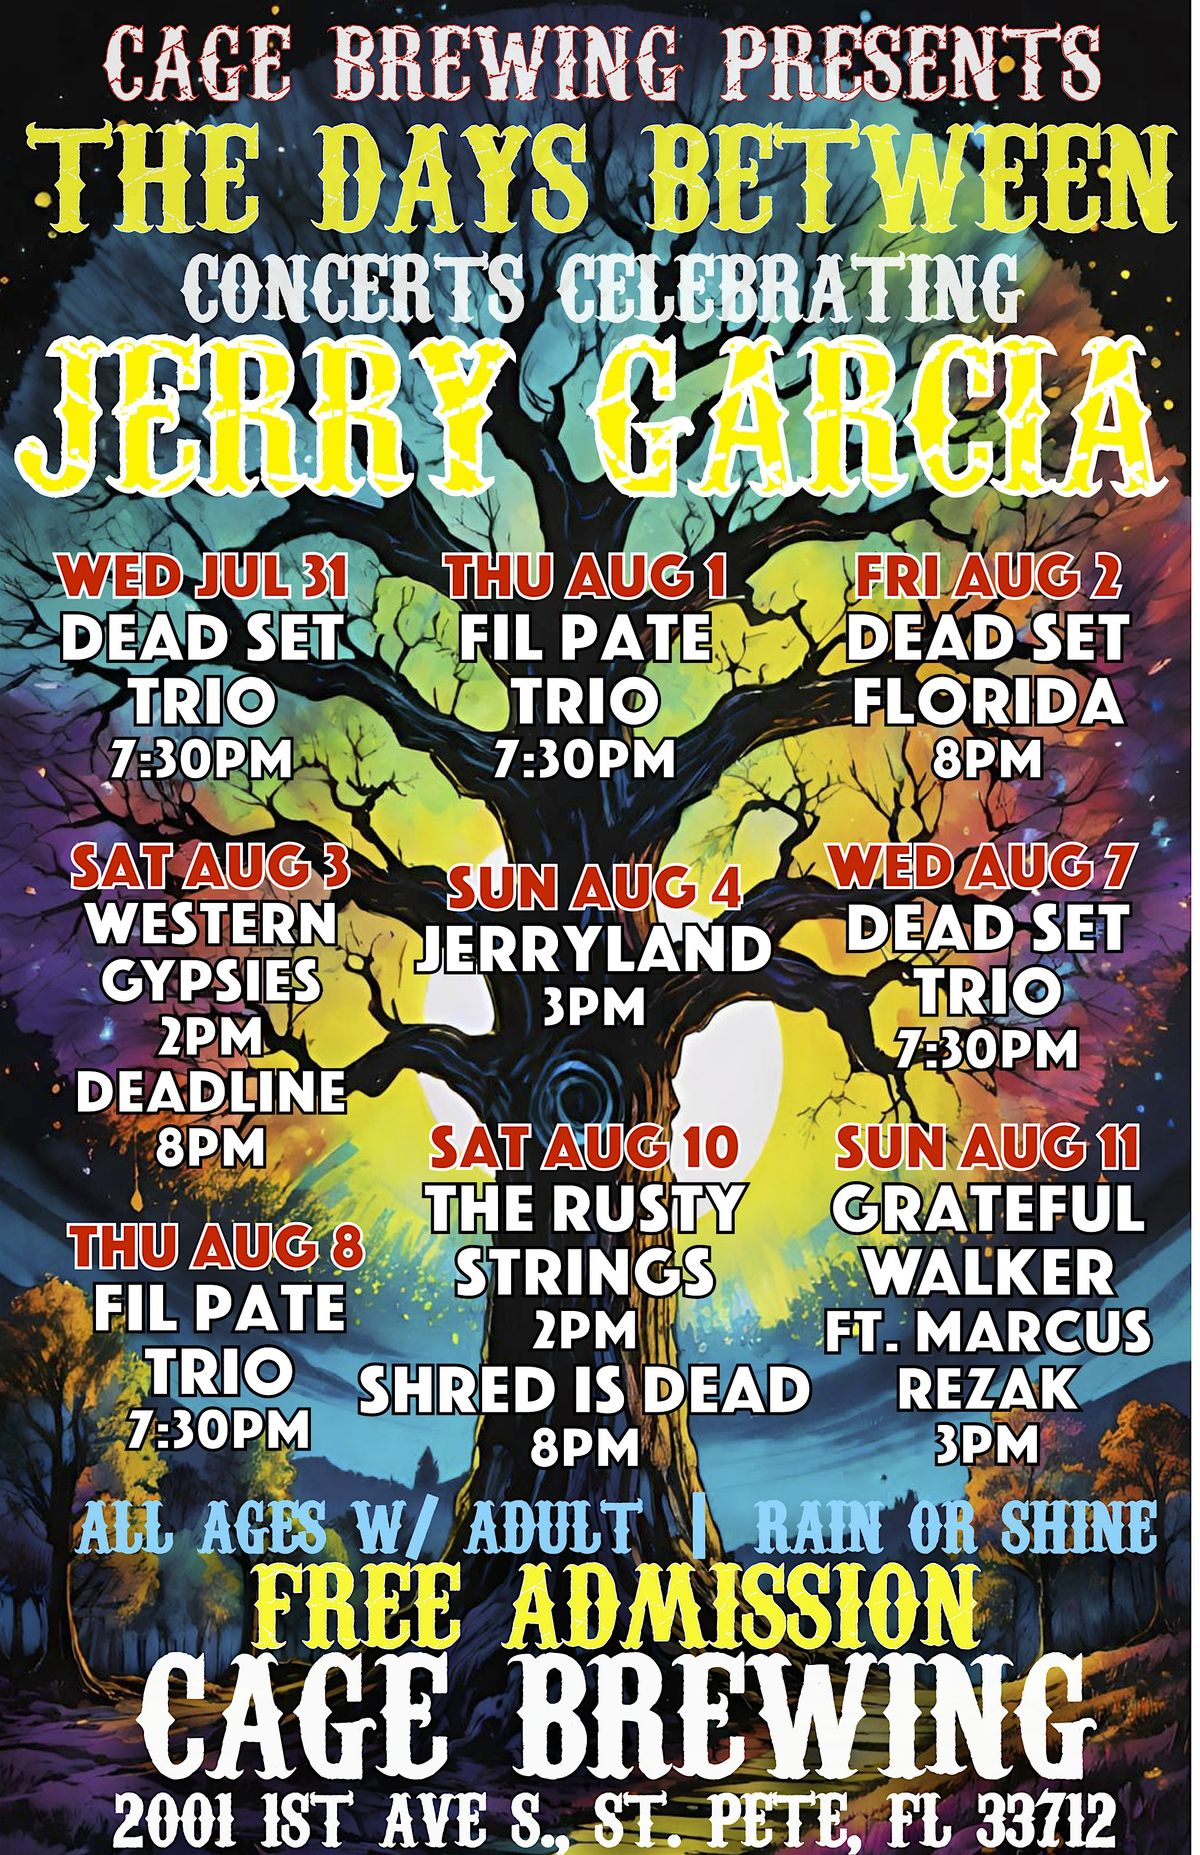 Cage Brewing Presents: The Days Between Concerts Celebrating Jerry Garcia | July 31-Aug 11 | Free